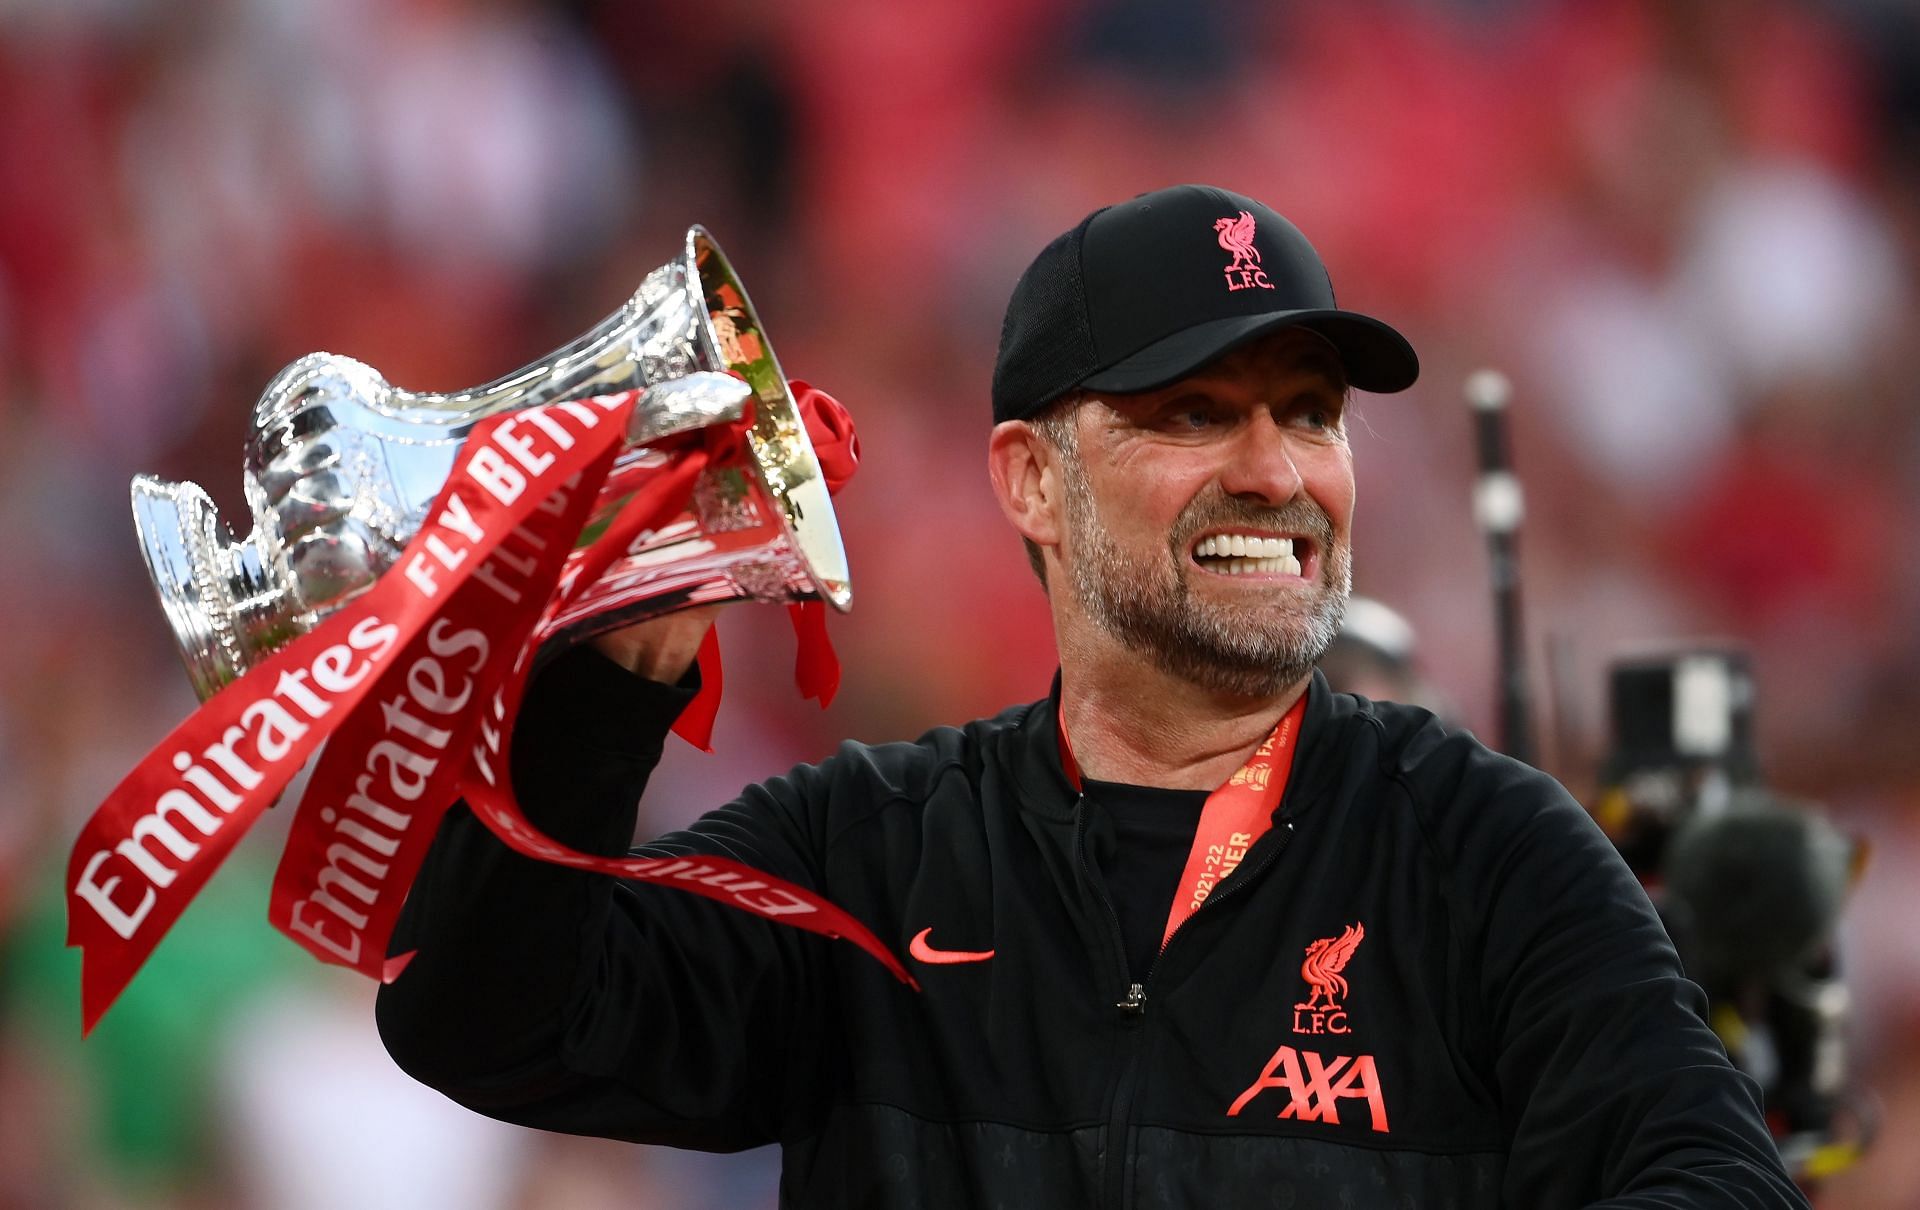 Jurgen Klopp has brought the good times back to Anfield